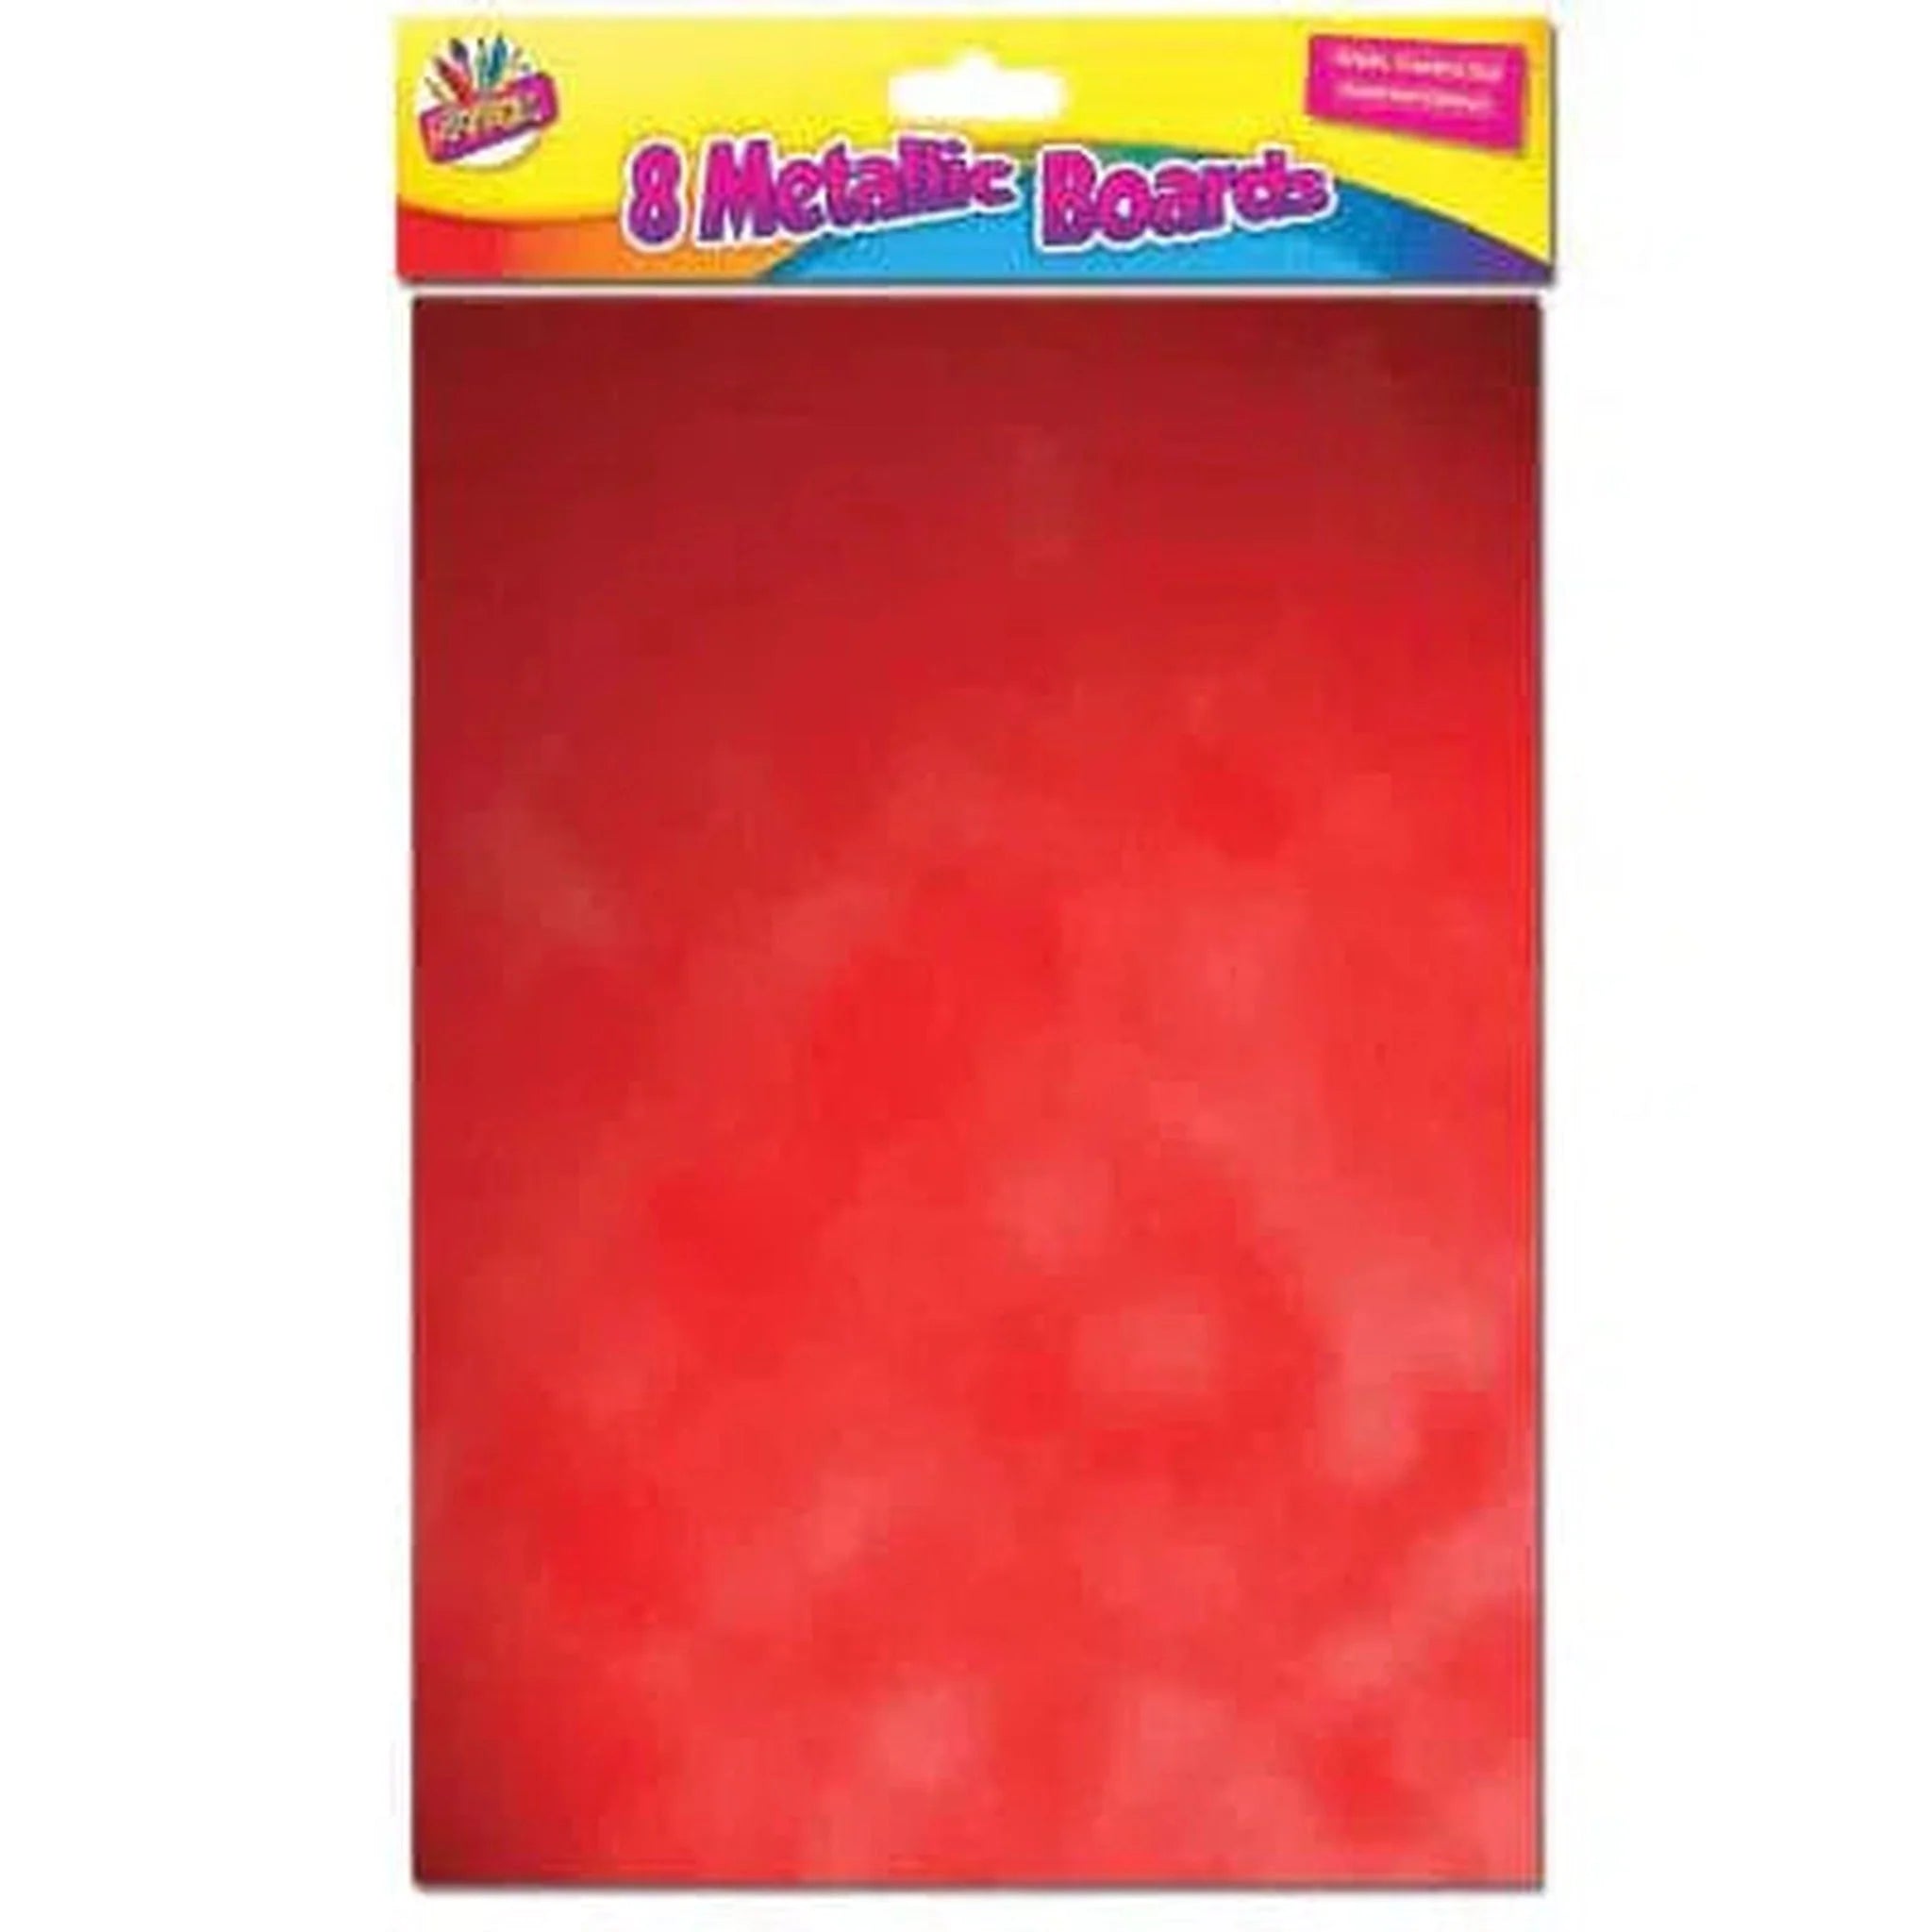 Metallic Boards Assorted Colours 8 Pack - Kids Party Craft